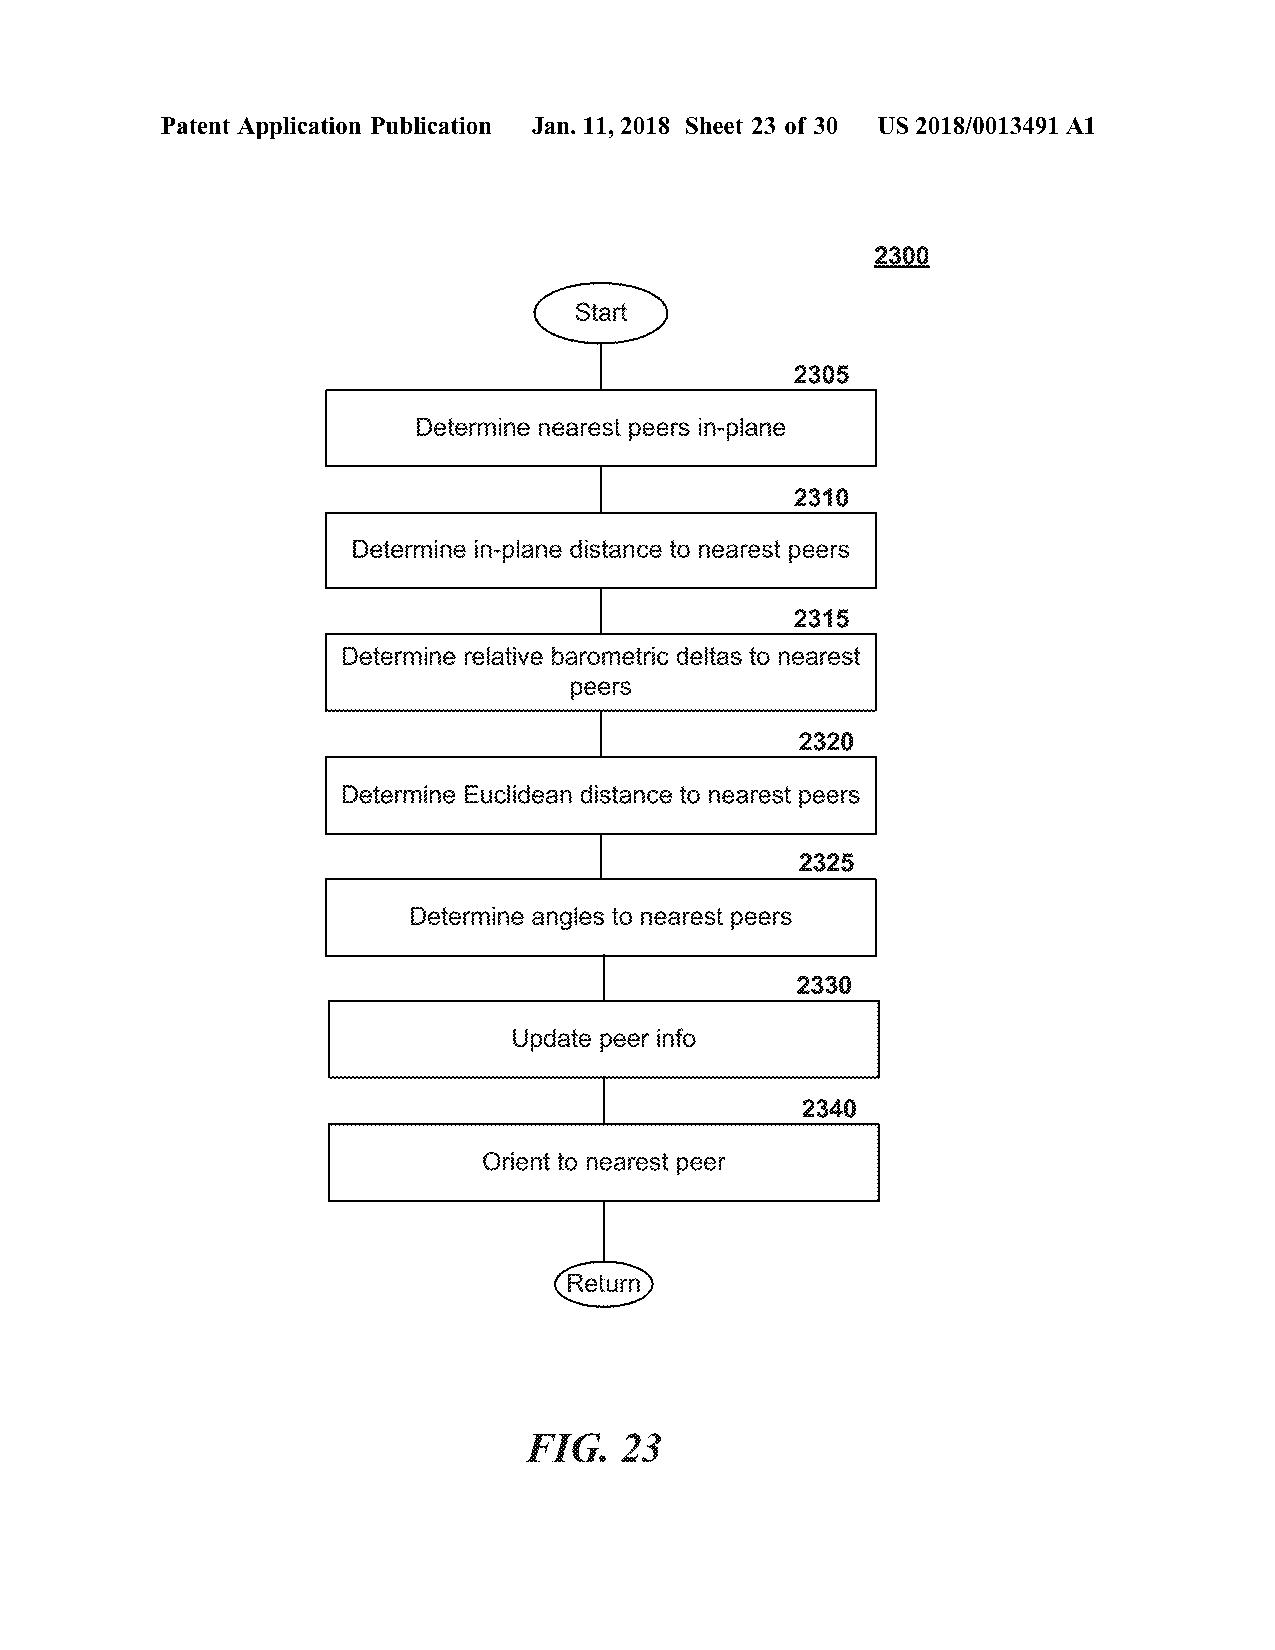 US20180013491A1 DEPLOYING LINE-OF-SIGHT COMMUNICATION NETWORK